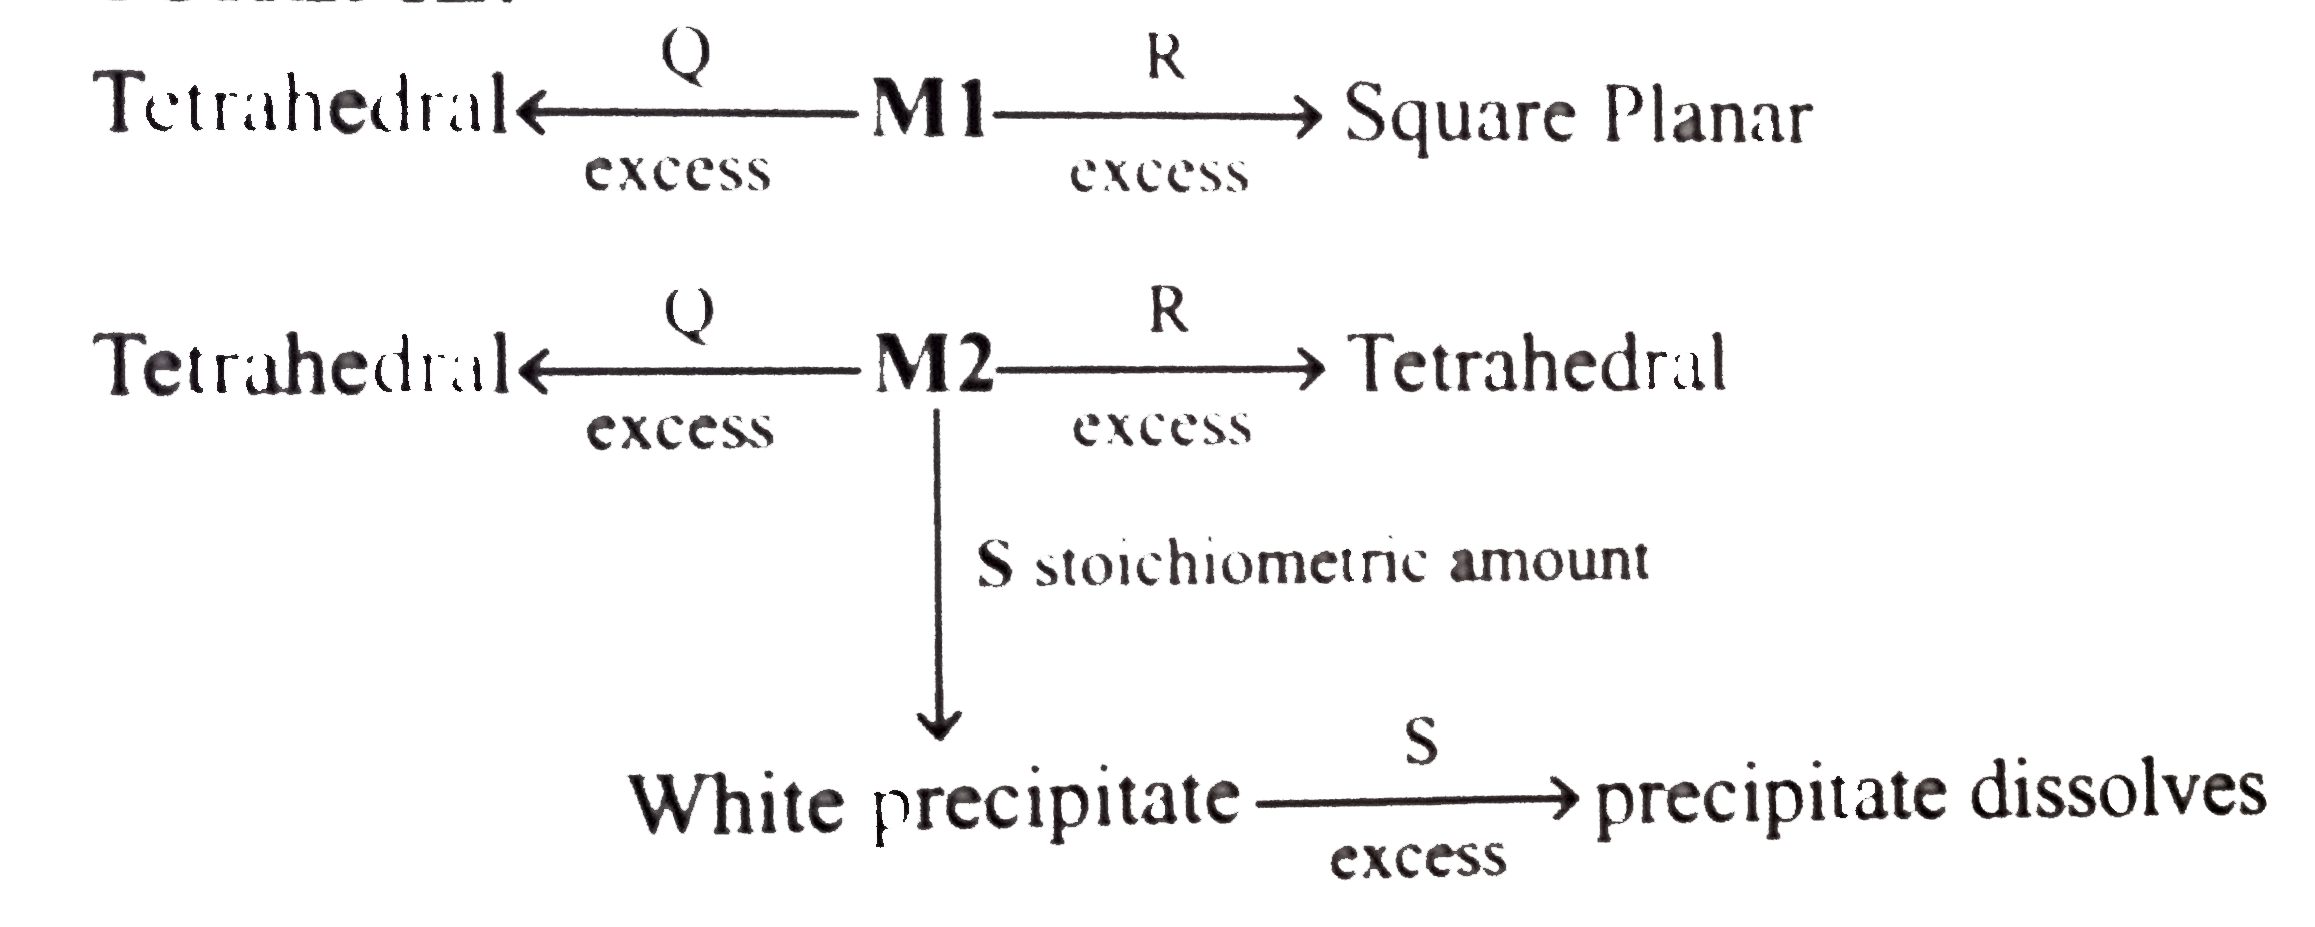 An aqueous solution of metal ion MI reacts separately with reagents Q and R in excess to give tetrahedral and square planar complexes, respectively An aqueous solution of another metal ion M2 always forms tetrahedral complexs with theses reagents. Aqueous solution of M2 on reaction with reagent S gives white precipitate which dissolves in excess of S The reactions are summarised in the scheme given below:  SCHEME :